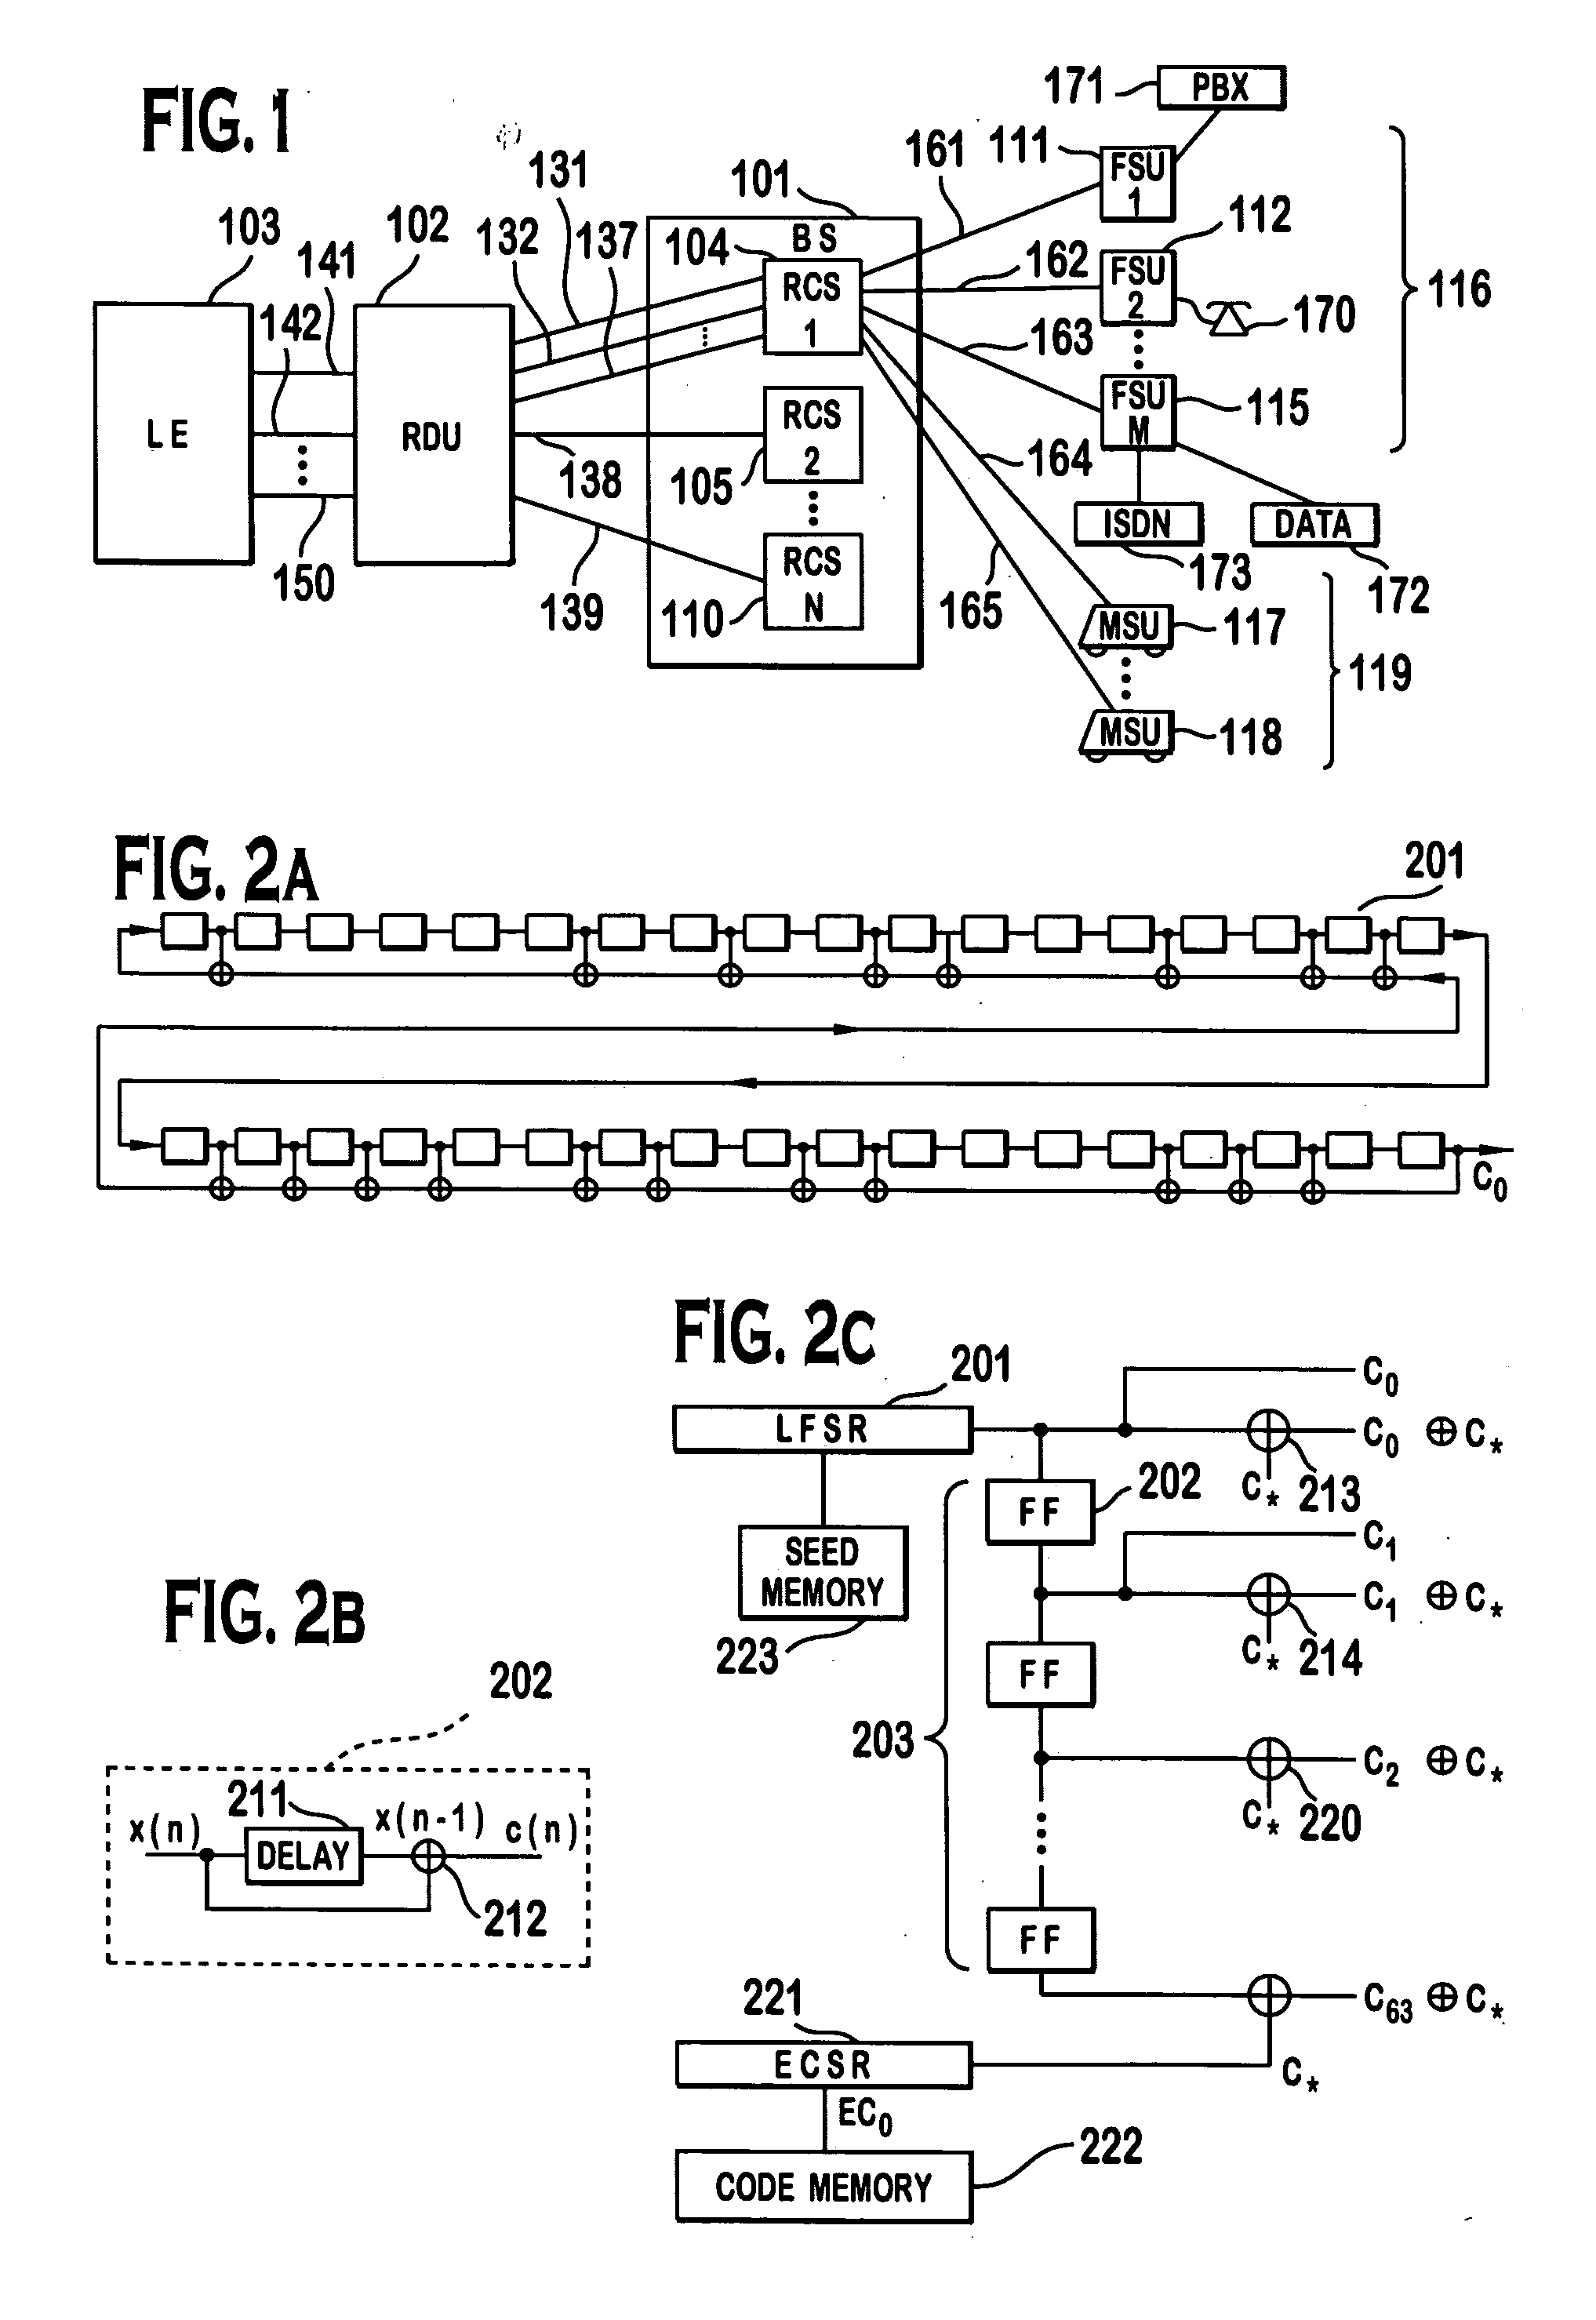 System for using rapid acquisition spreading codes for spread-spectrum communications